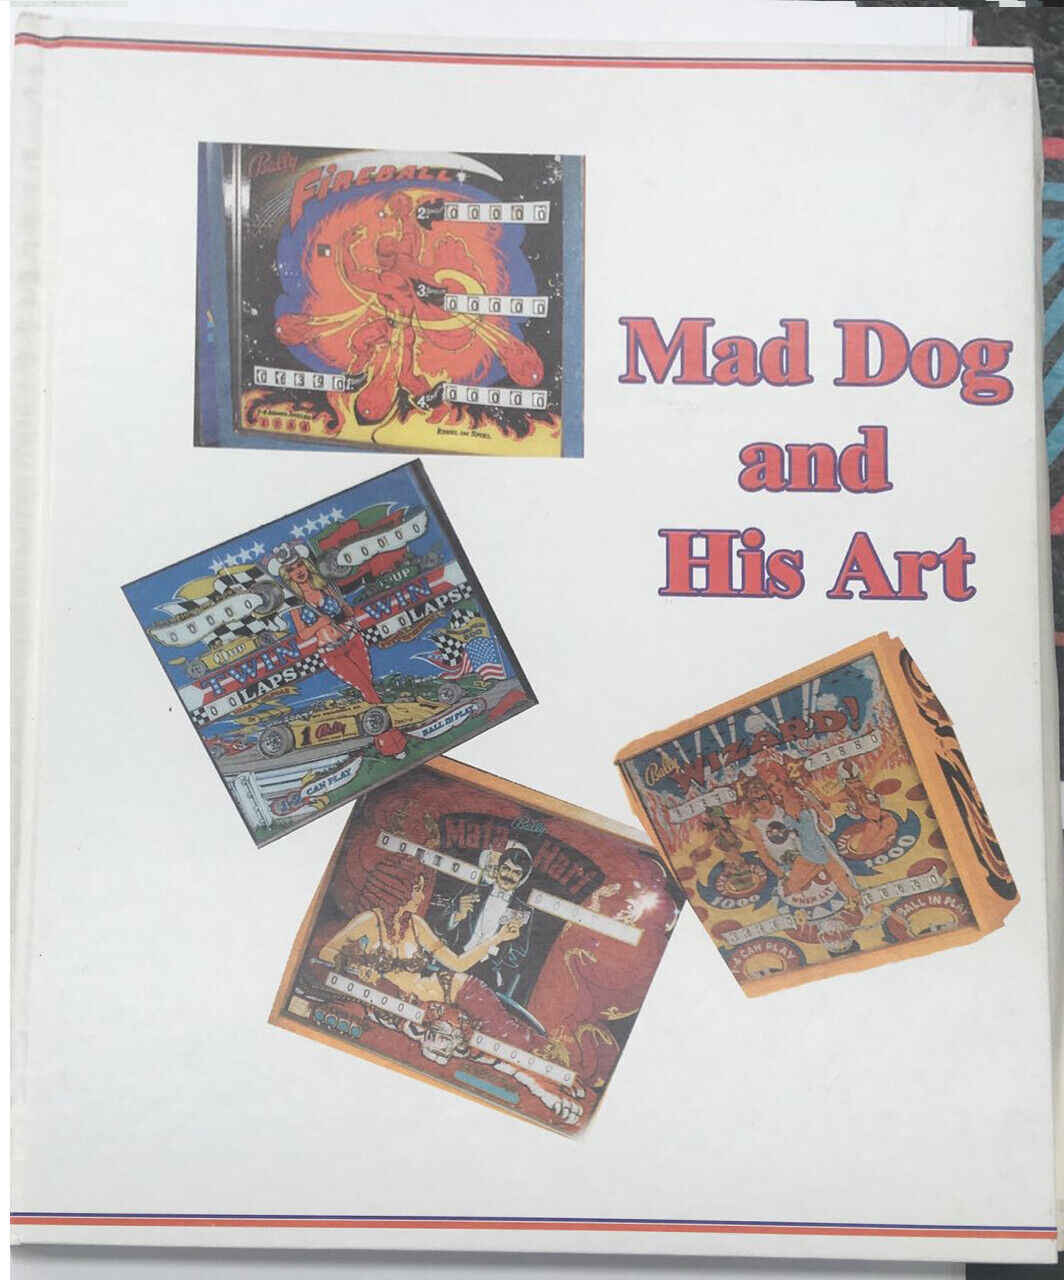 Mad Dog and His Art - Pinball Book about Dave Christensen - New - Out of Print 